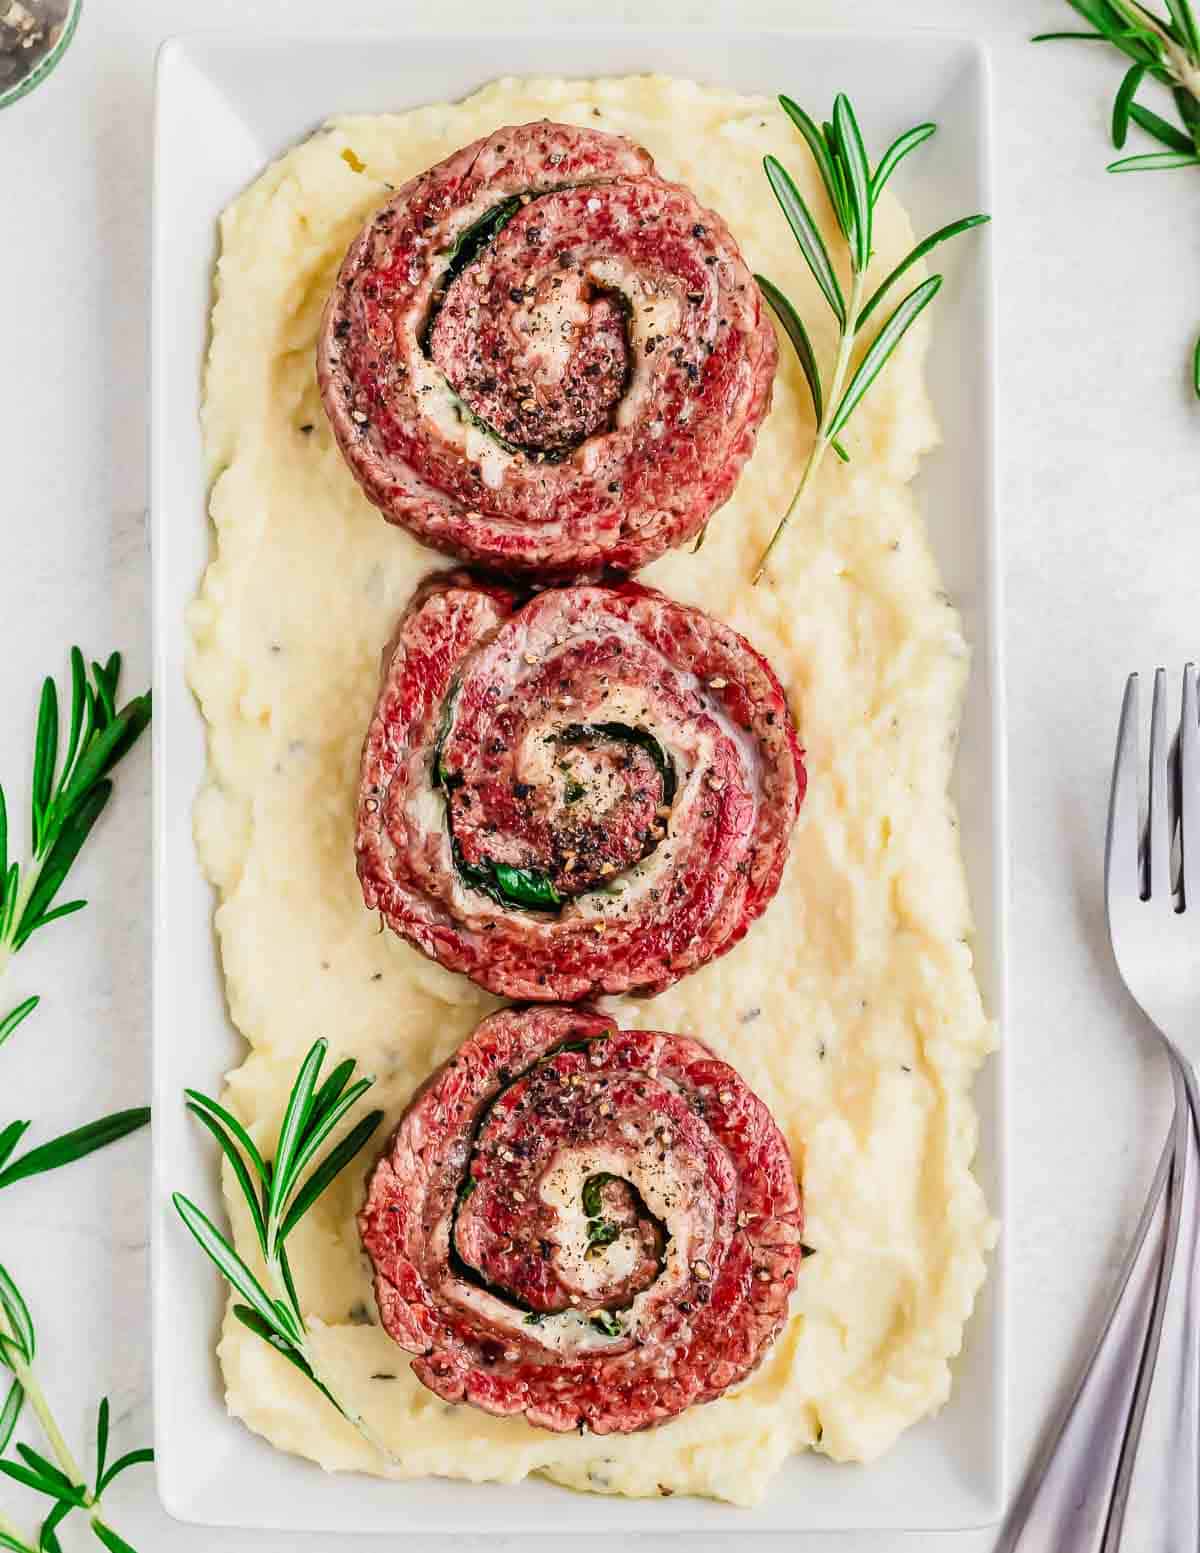 Beef flank steak pinwheels on a bed of mashed parsnips garnished with rosemary sprigs.